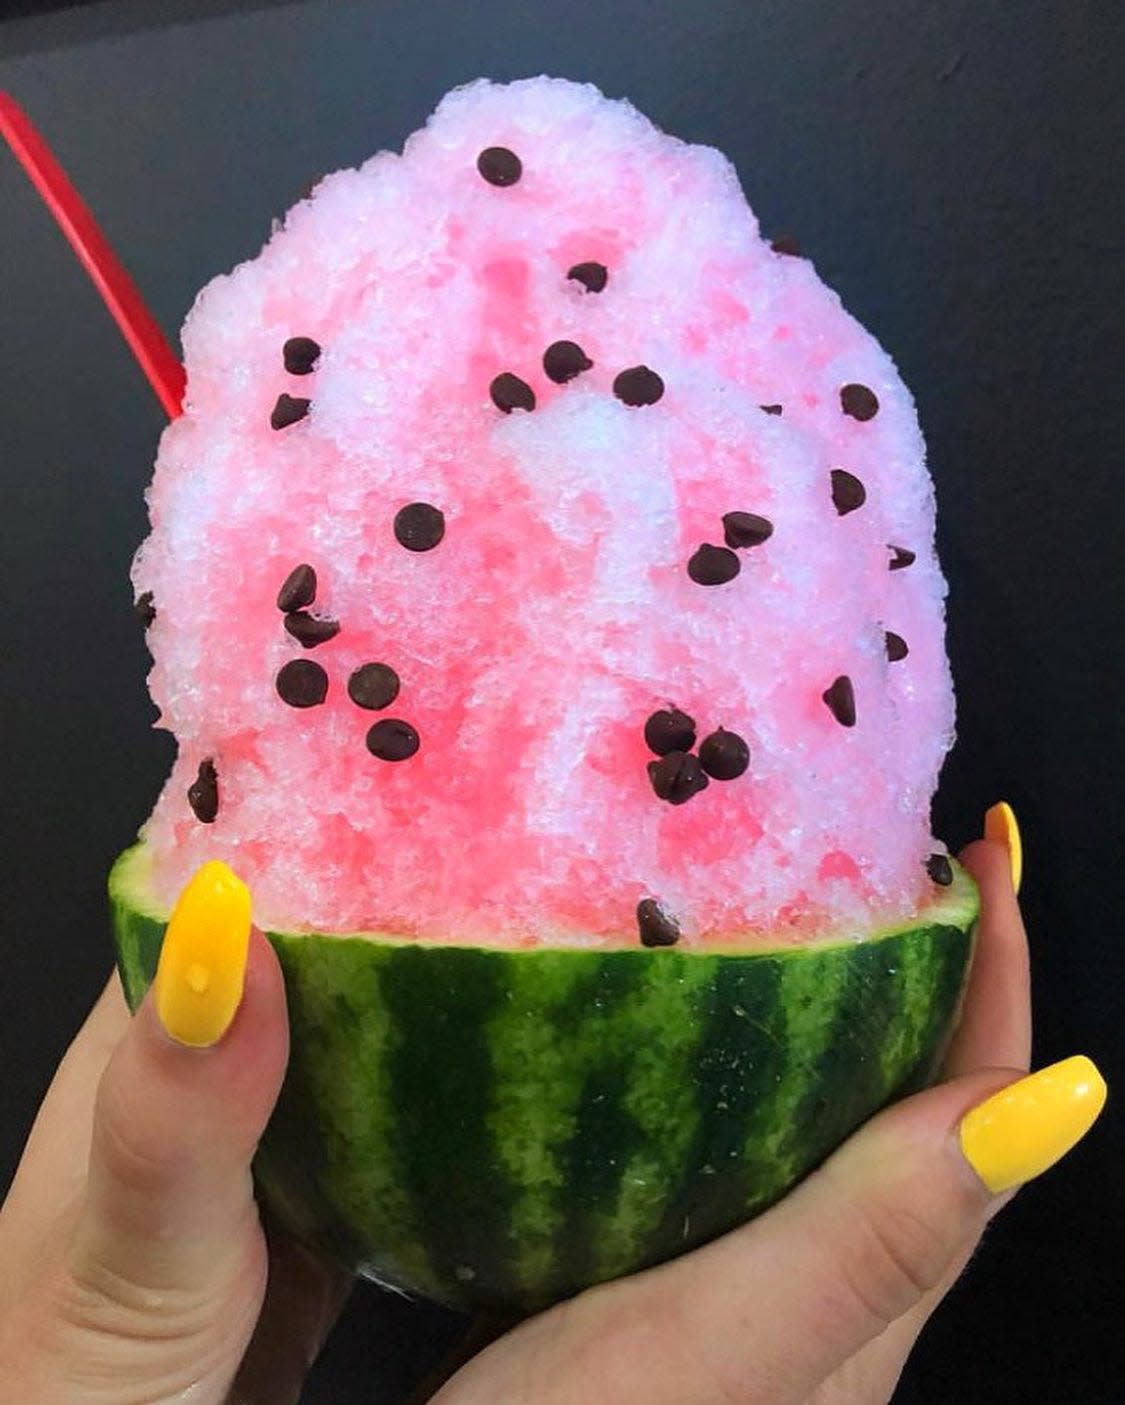 Watermelon shaved ice with chocolate chips, served in a small watermelon at Betty's Icebox in Asbury Park.